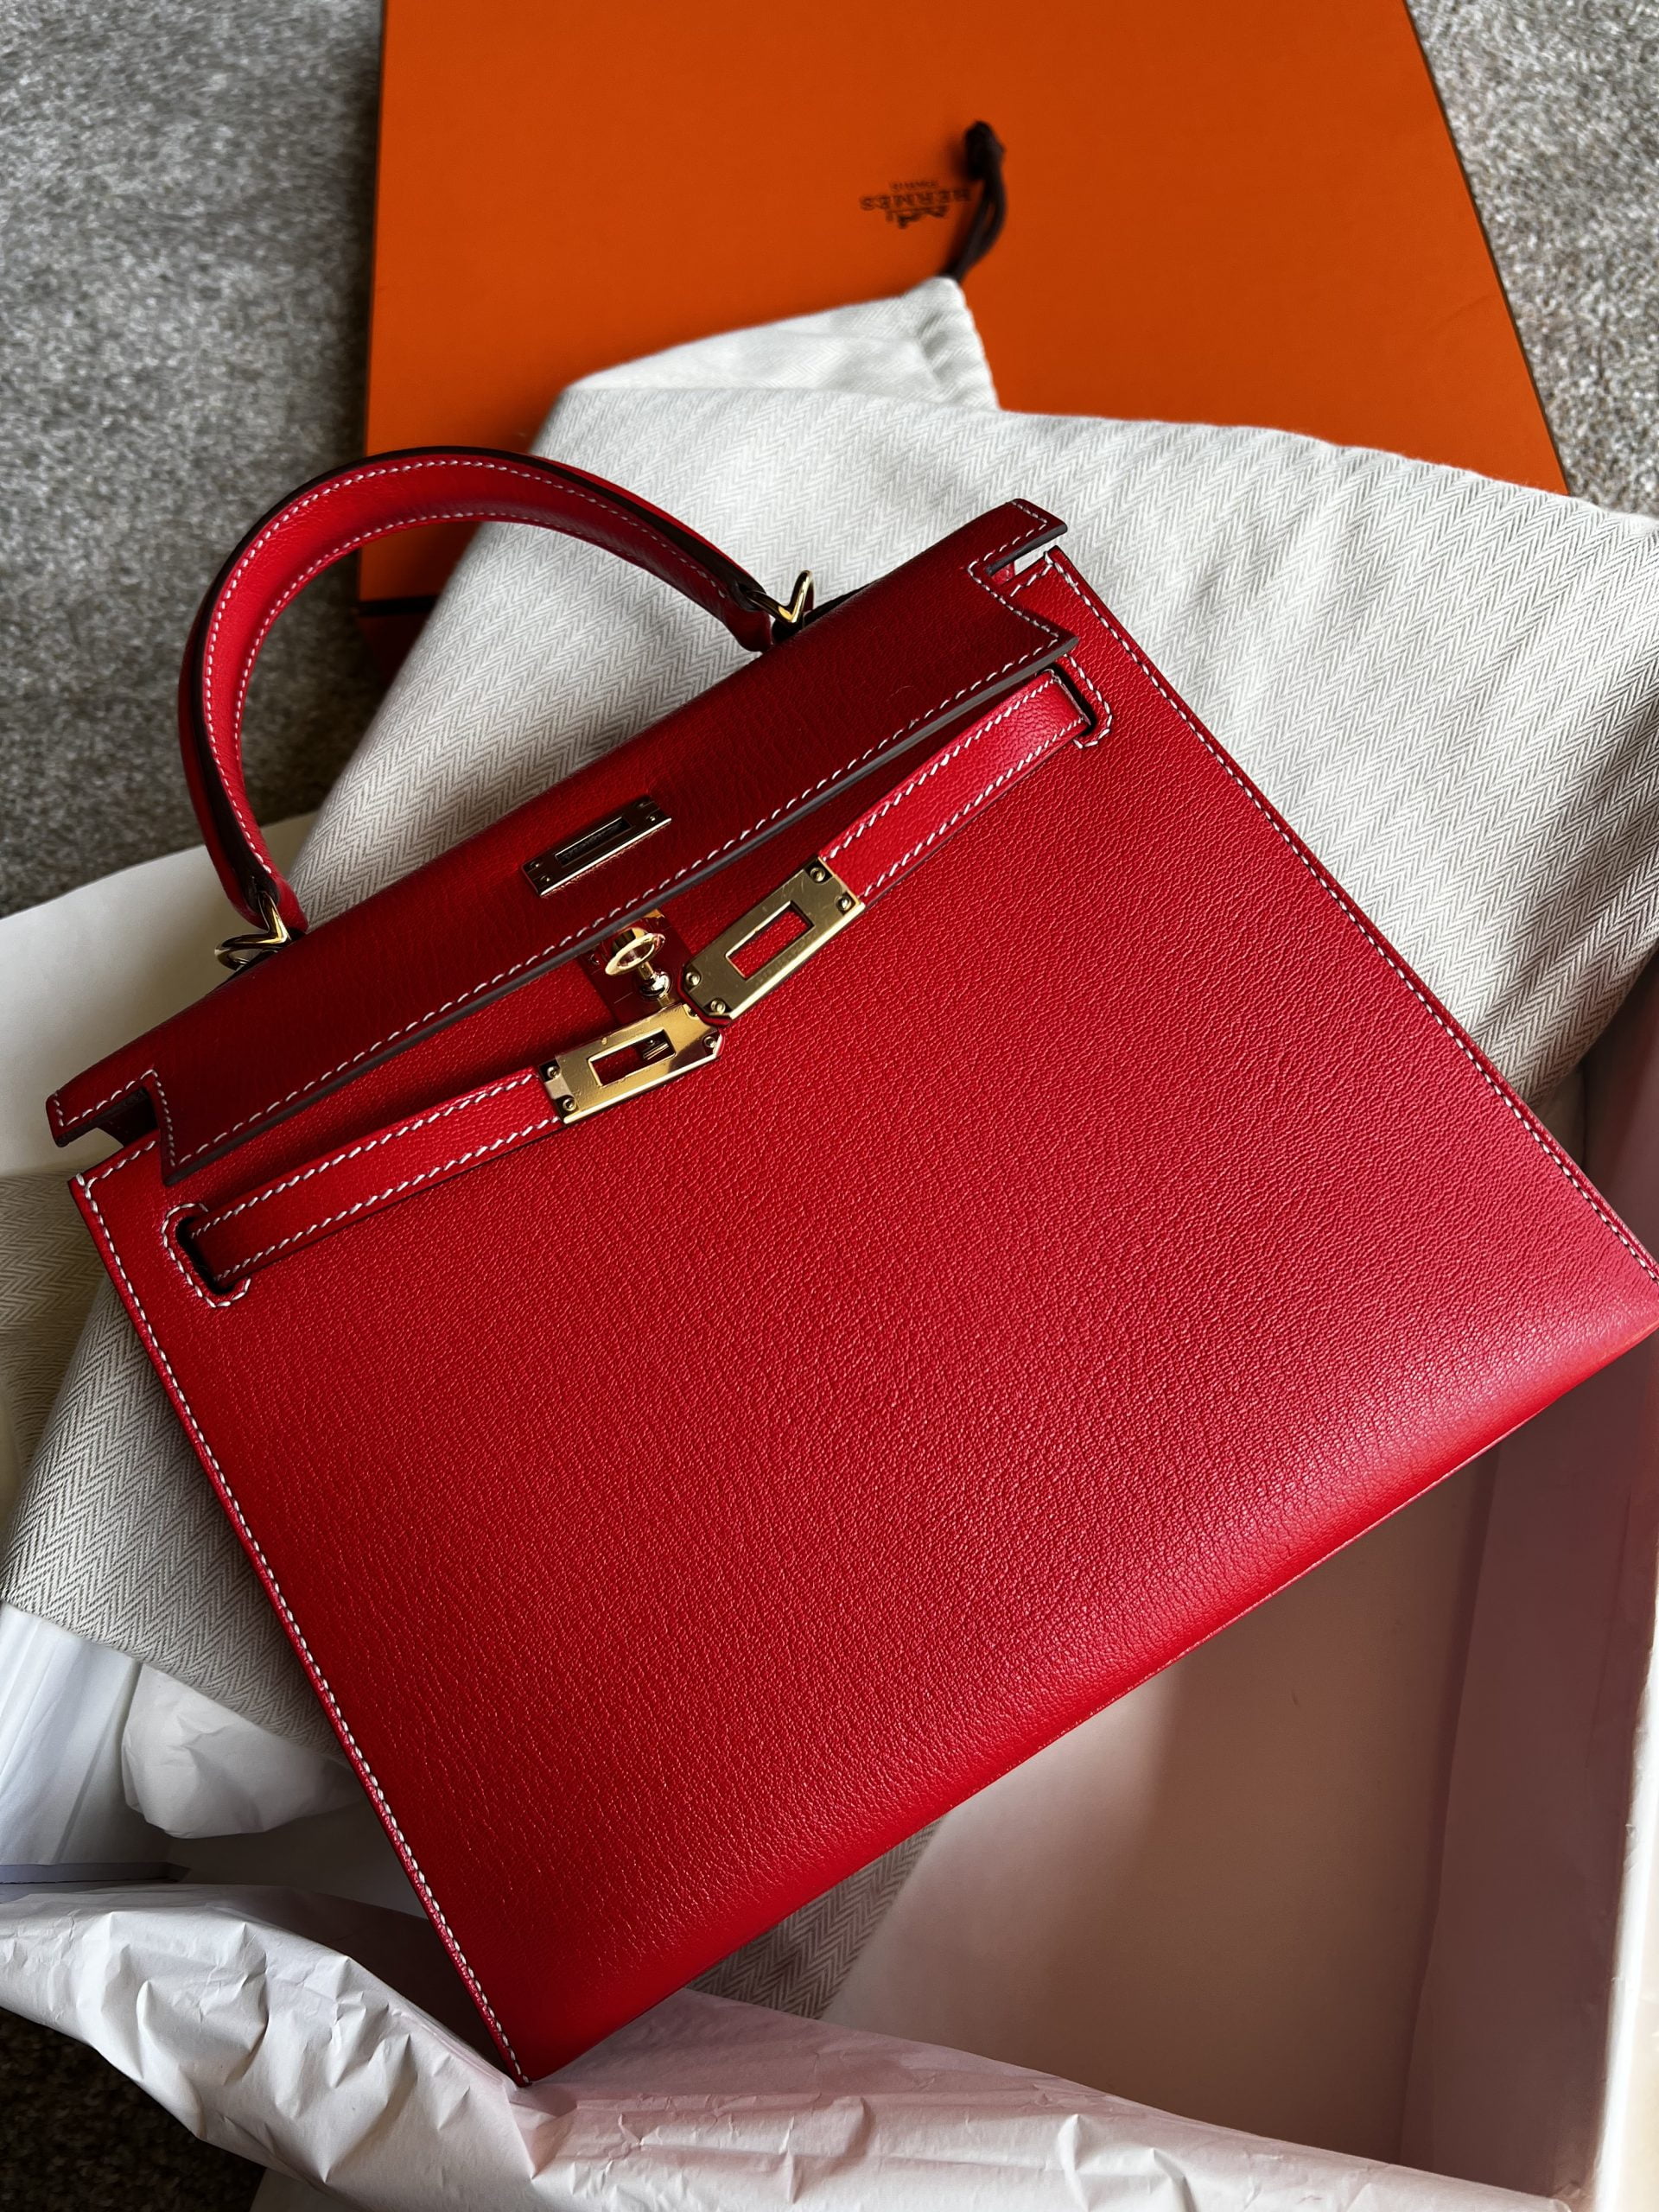 Why Special Edition Hermes Bags & Boxes Are the Epitome of VIP